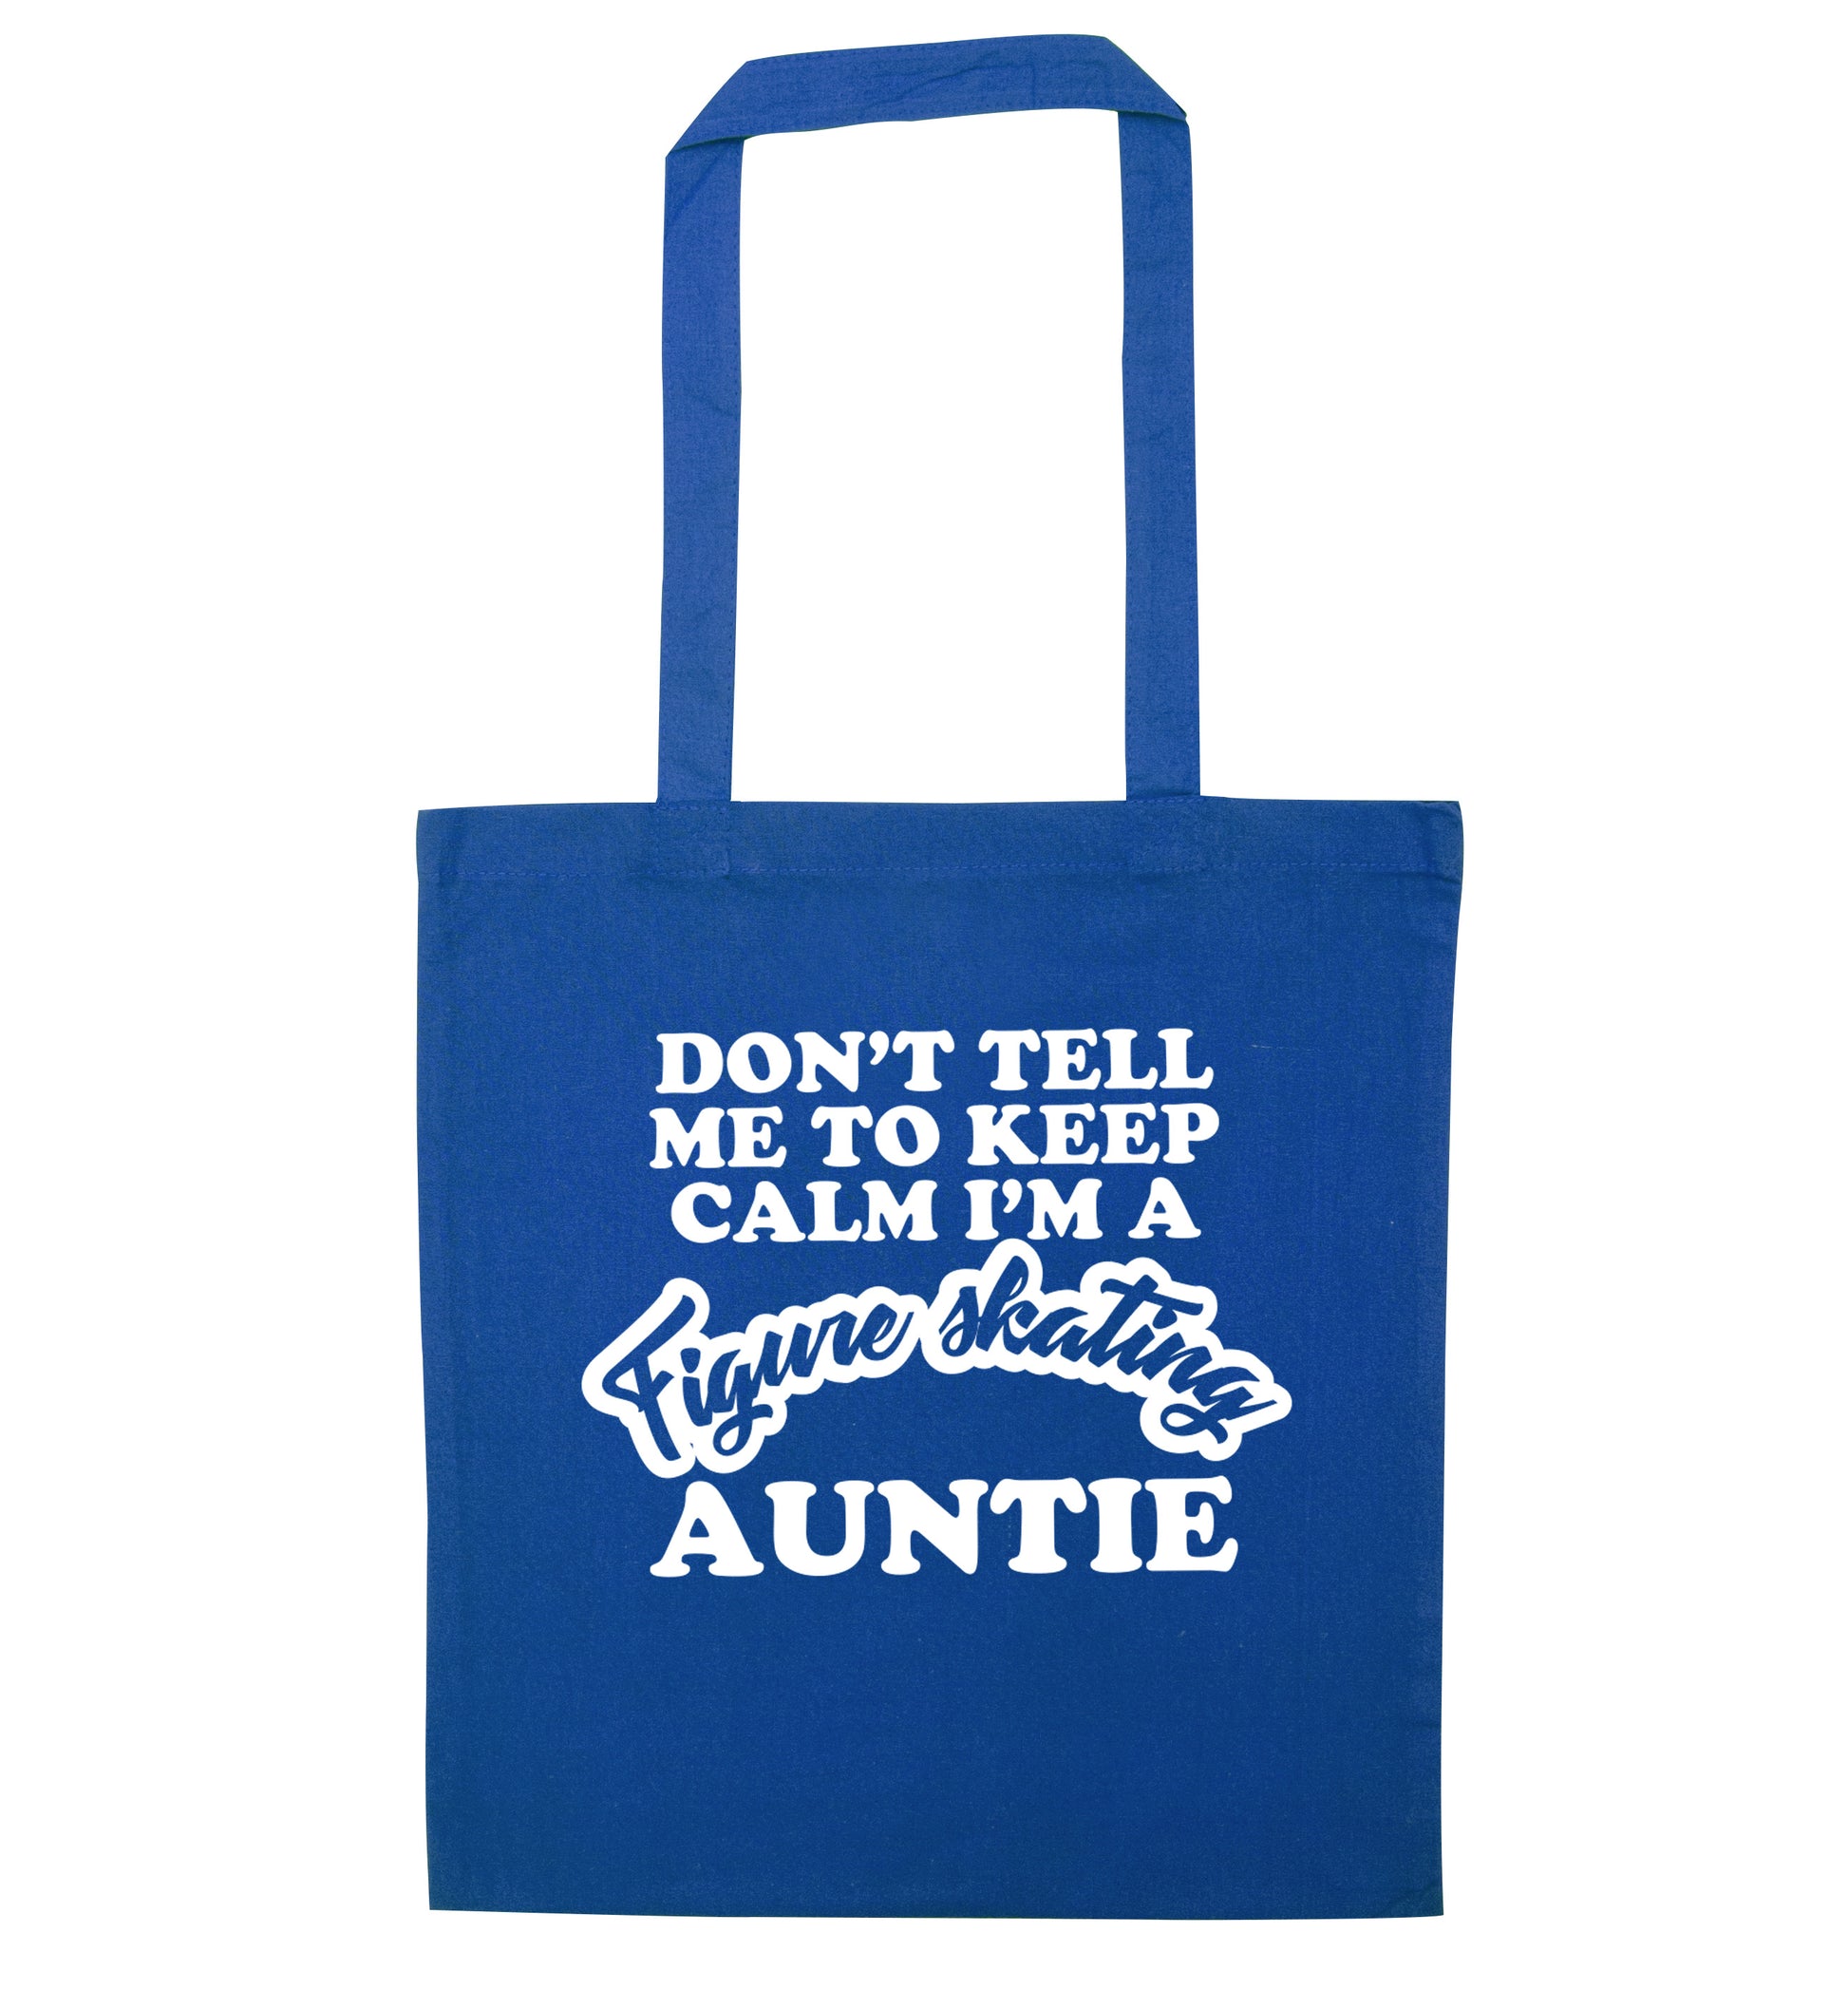 Don't tell me to keep calm I'm a figure skating auntie blue tote bag